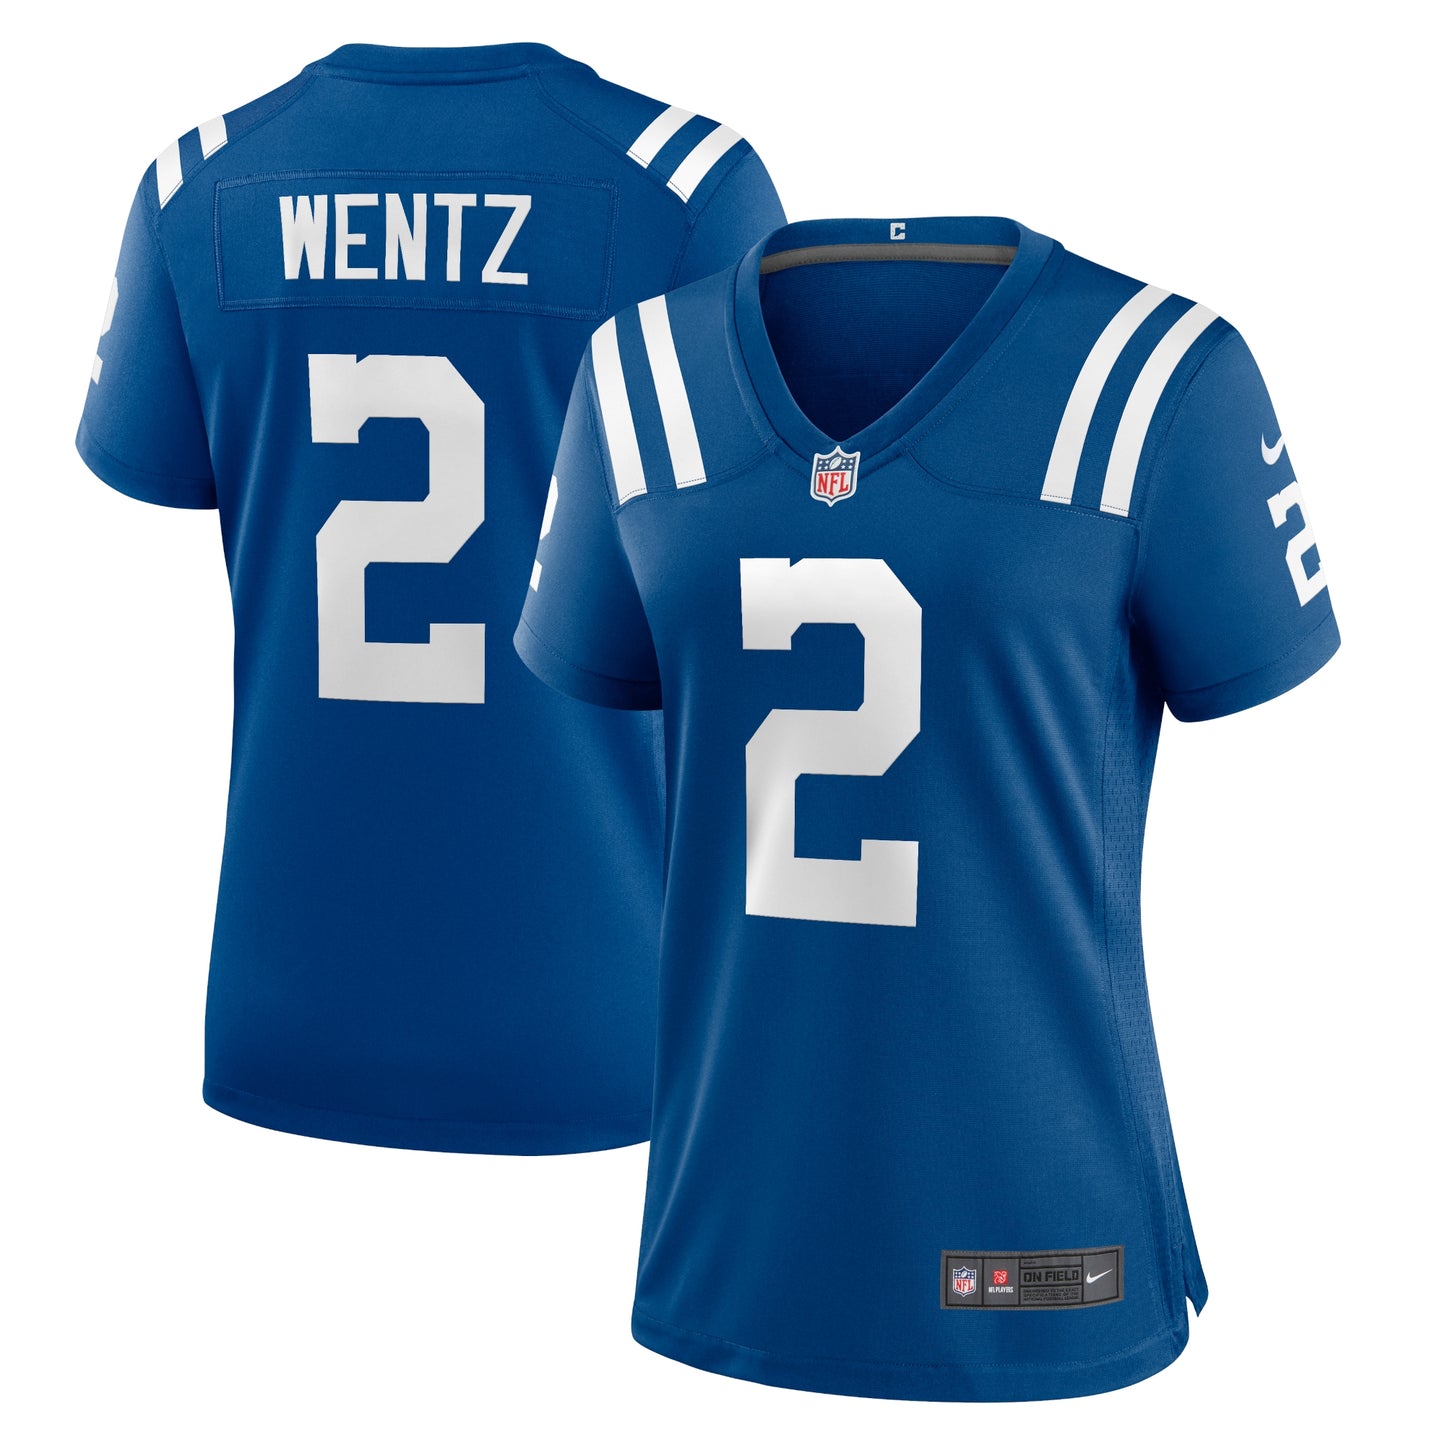 Carson Wentz Indianapolis Colts Nike Women's Player Game Jersey - Royal